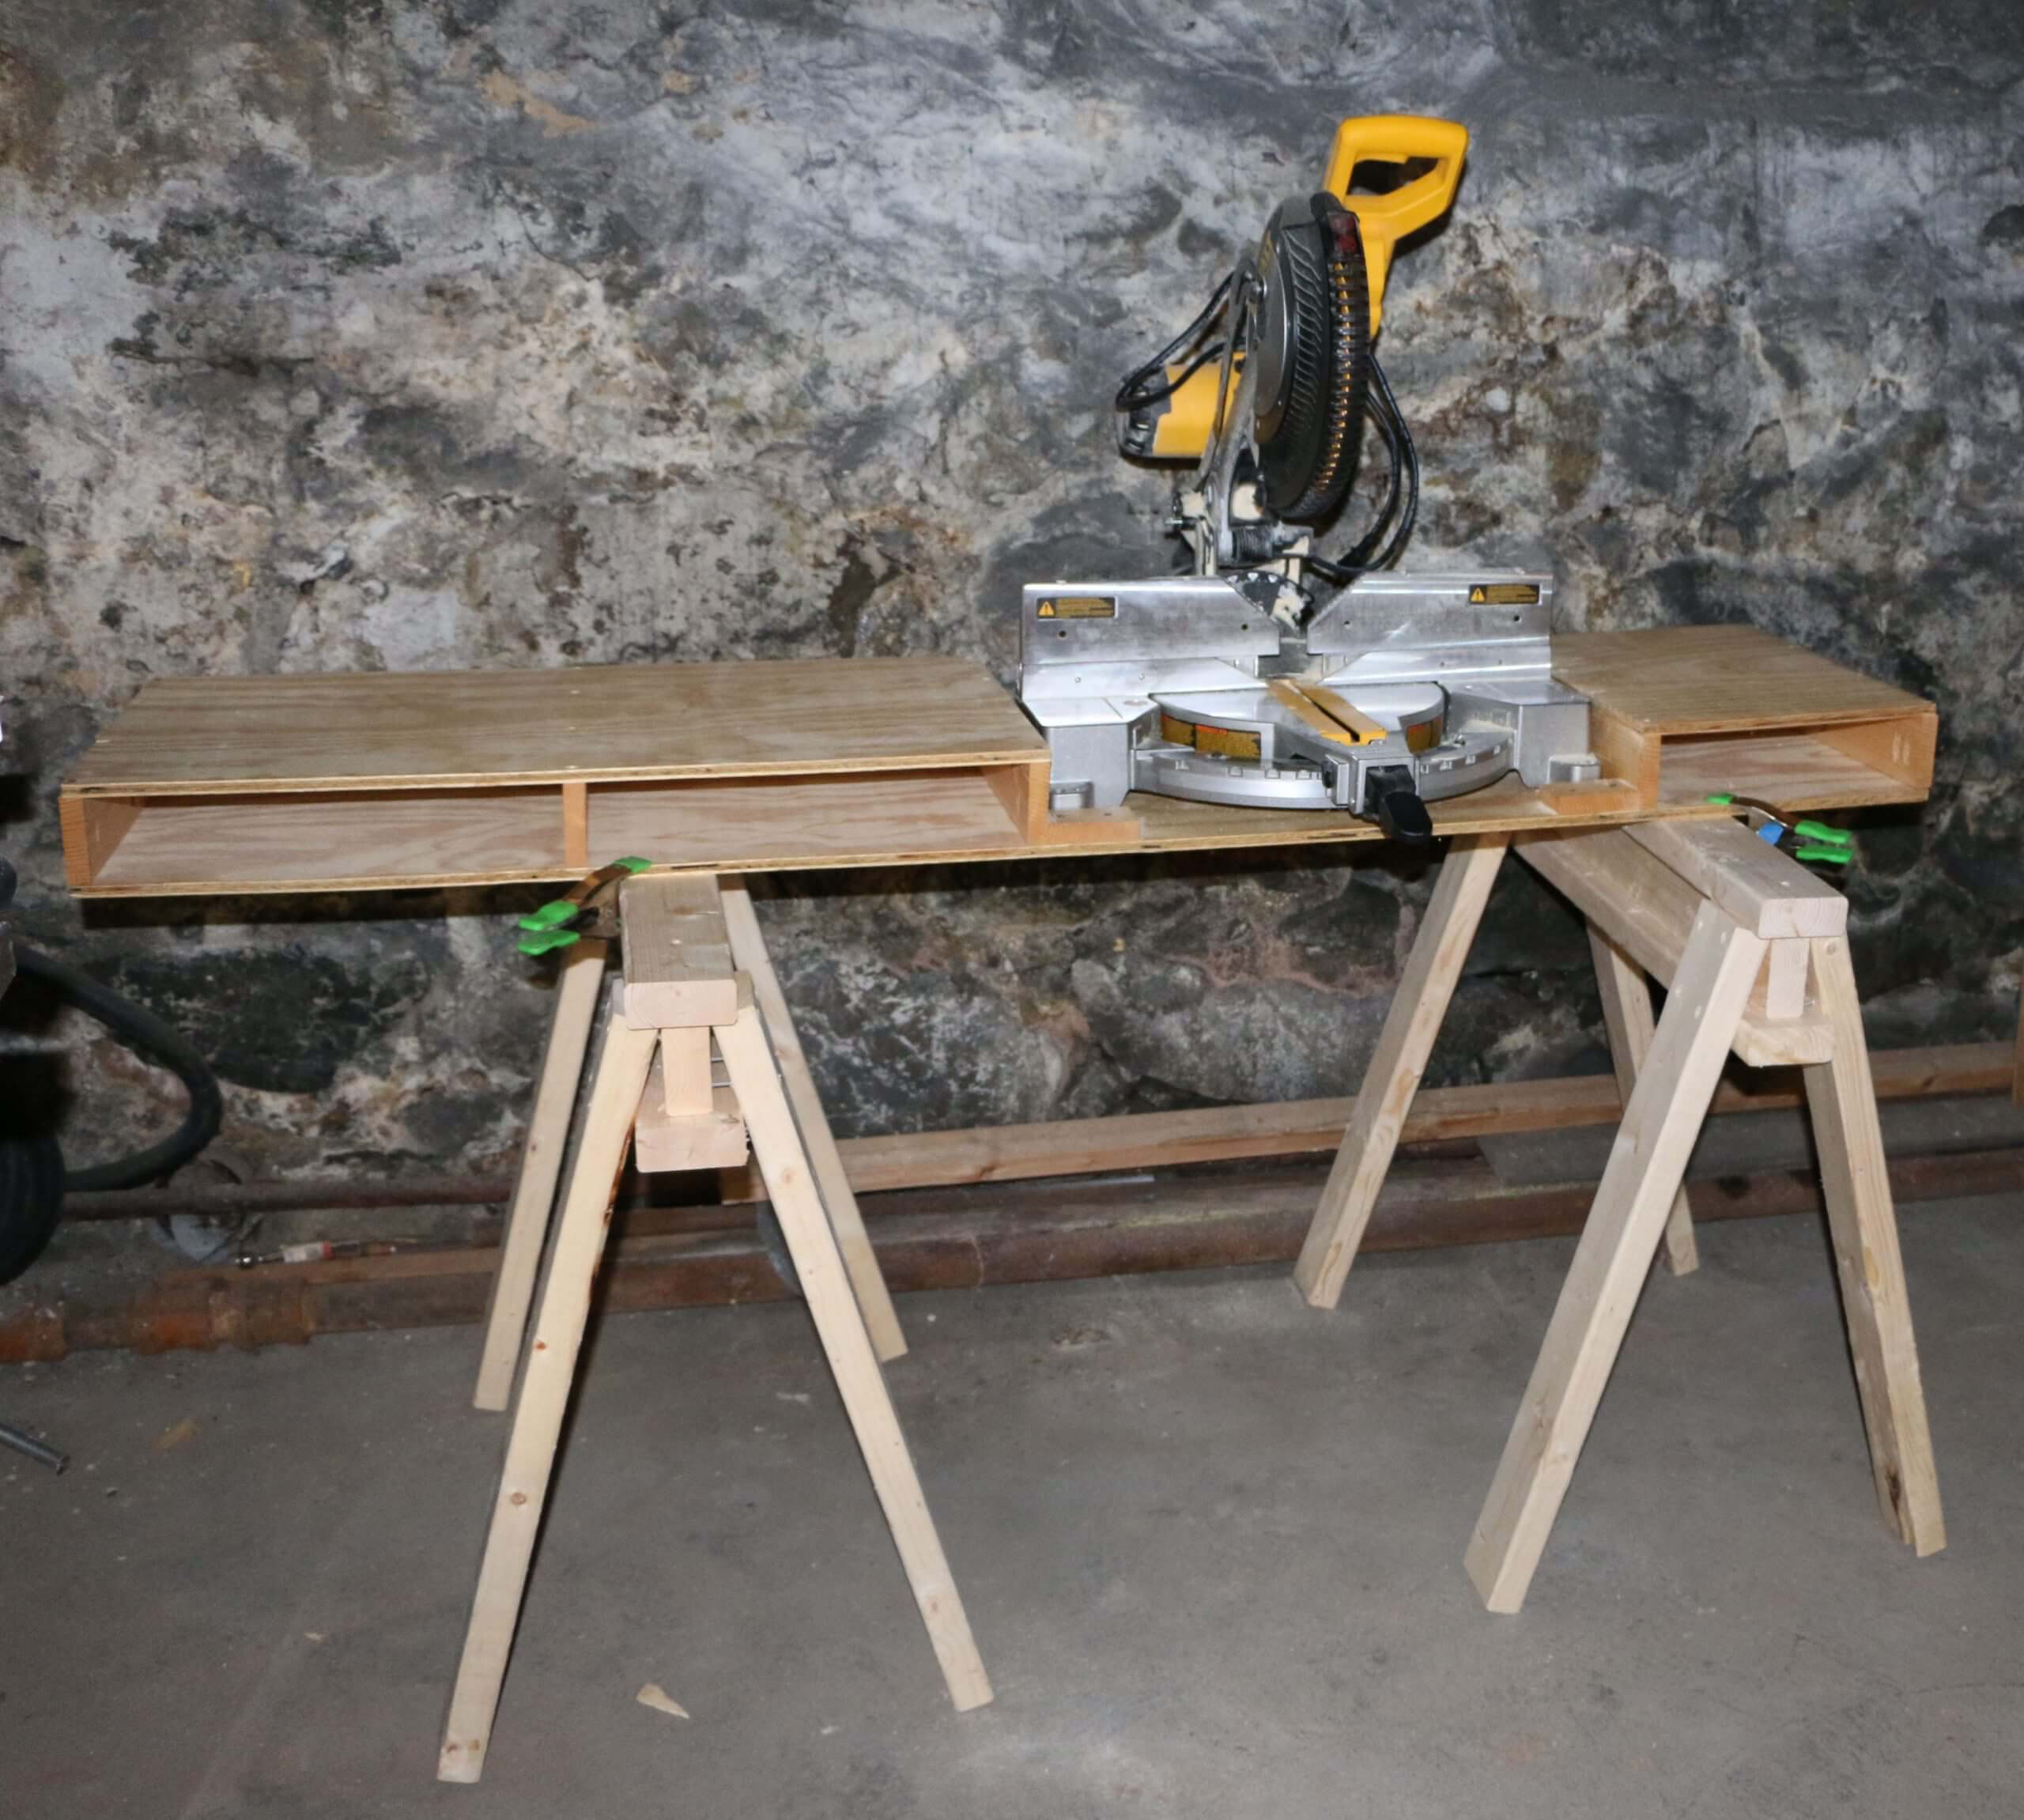 Miter Saw vs. Table Saw: Is There Really a Difference?